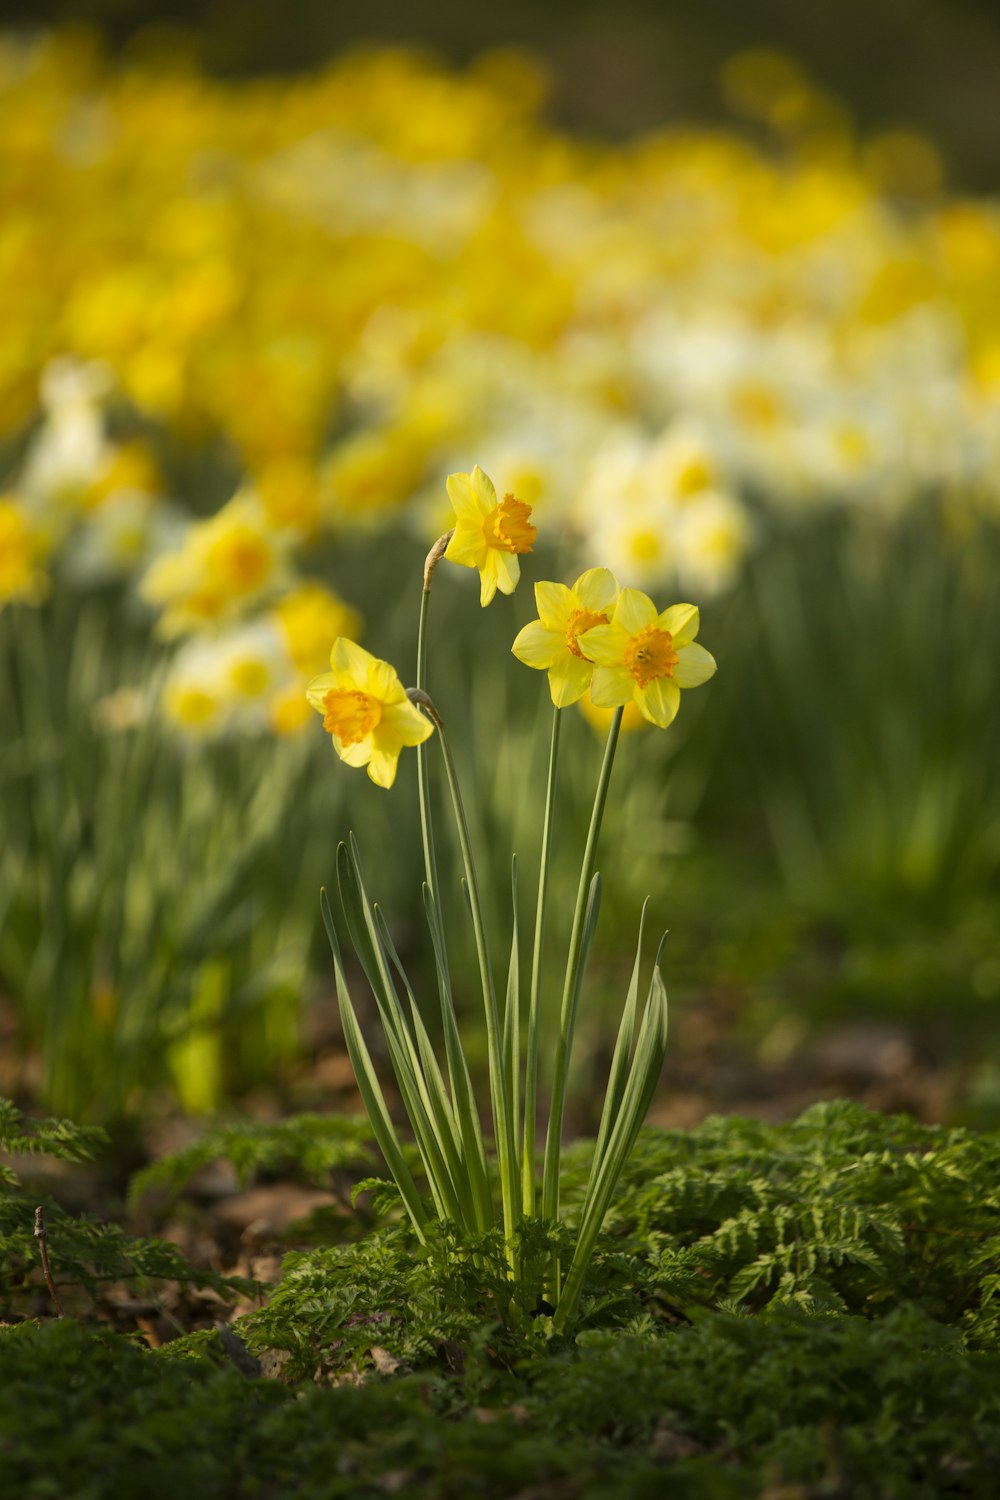 a field of yellow daffodils growing in the grass